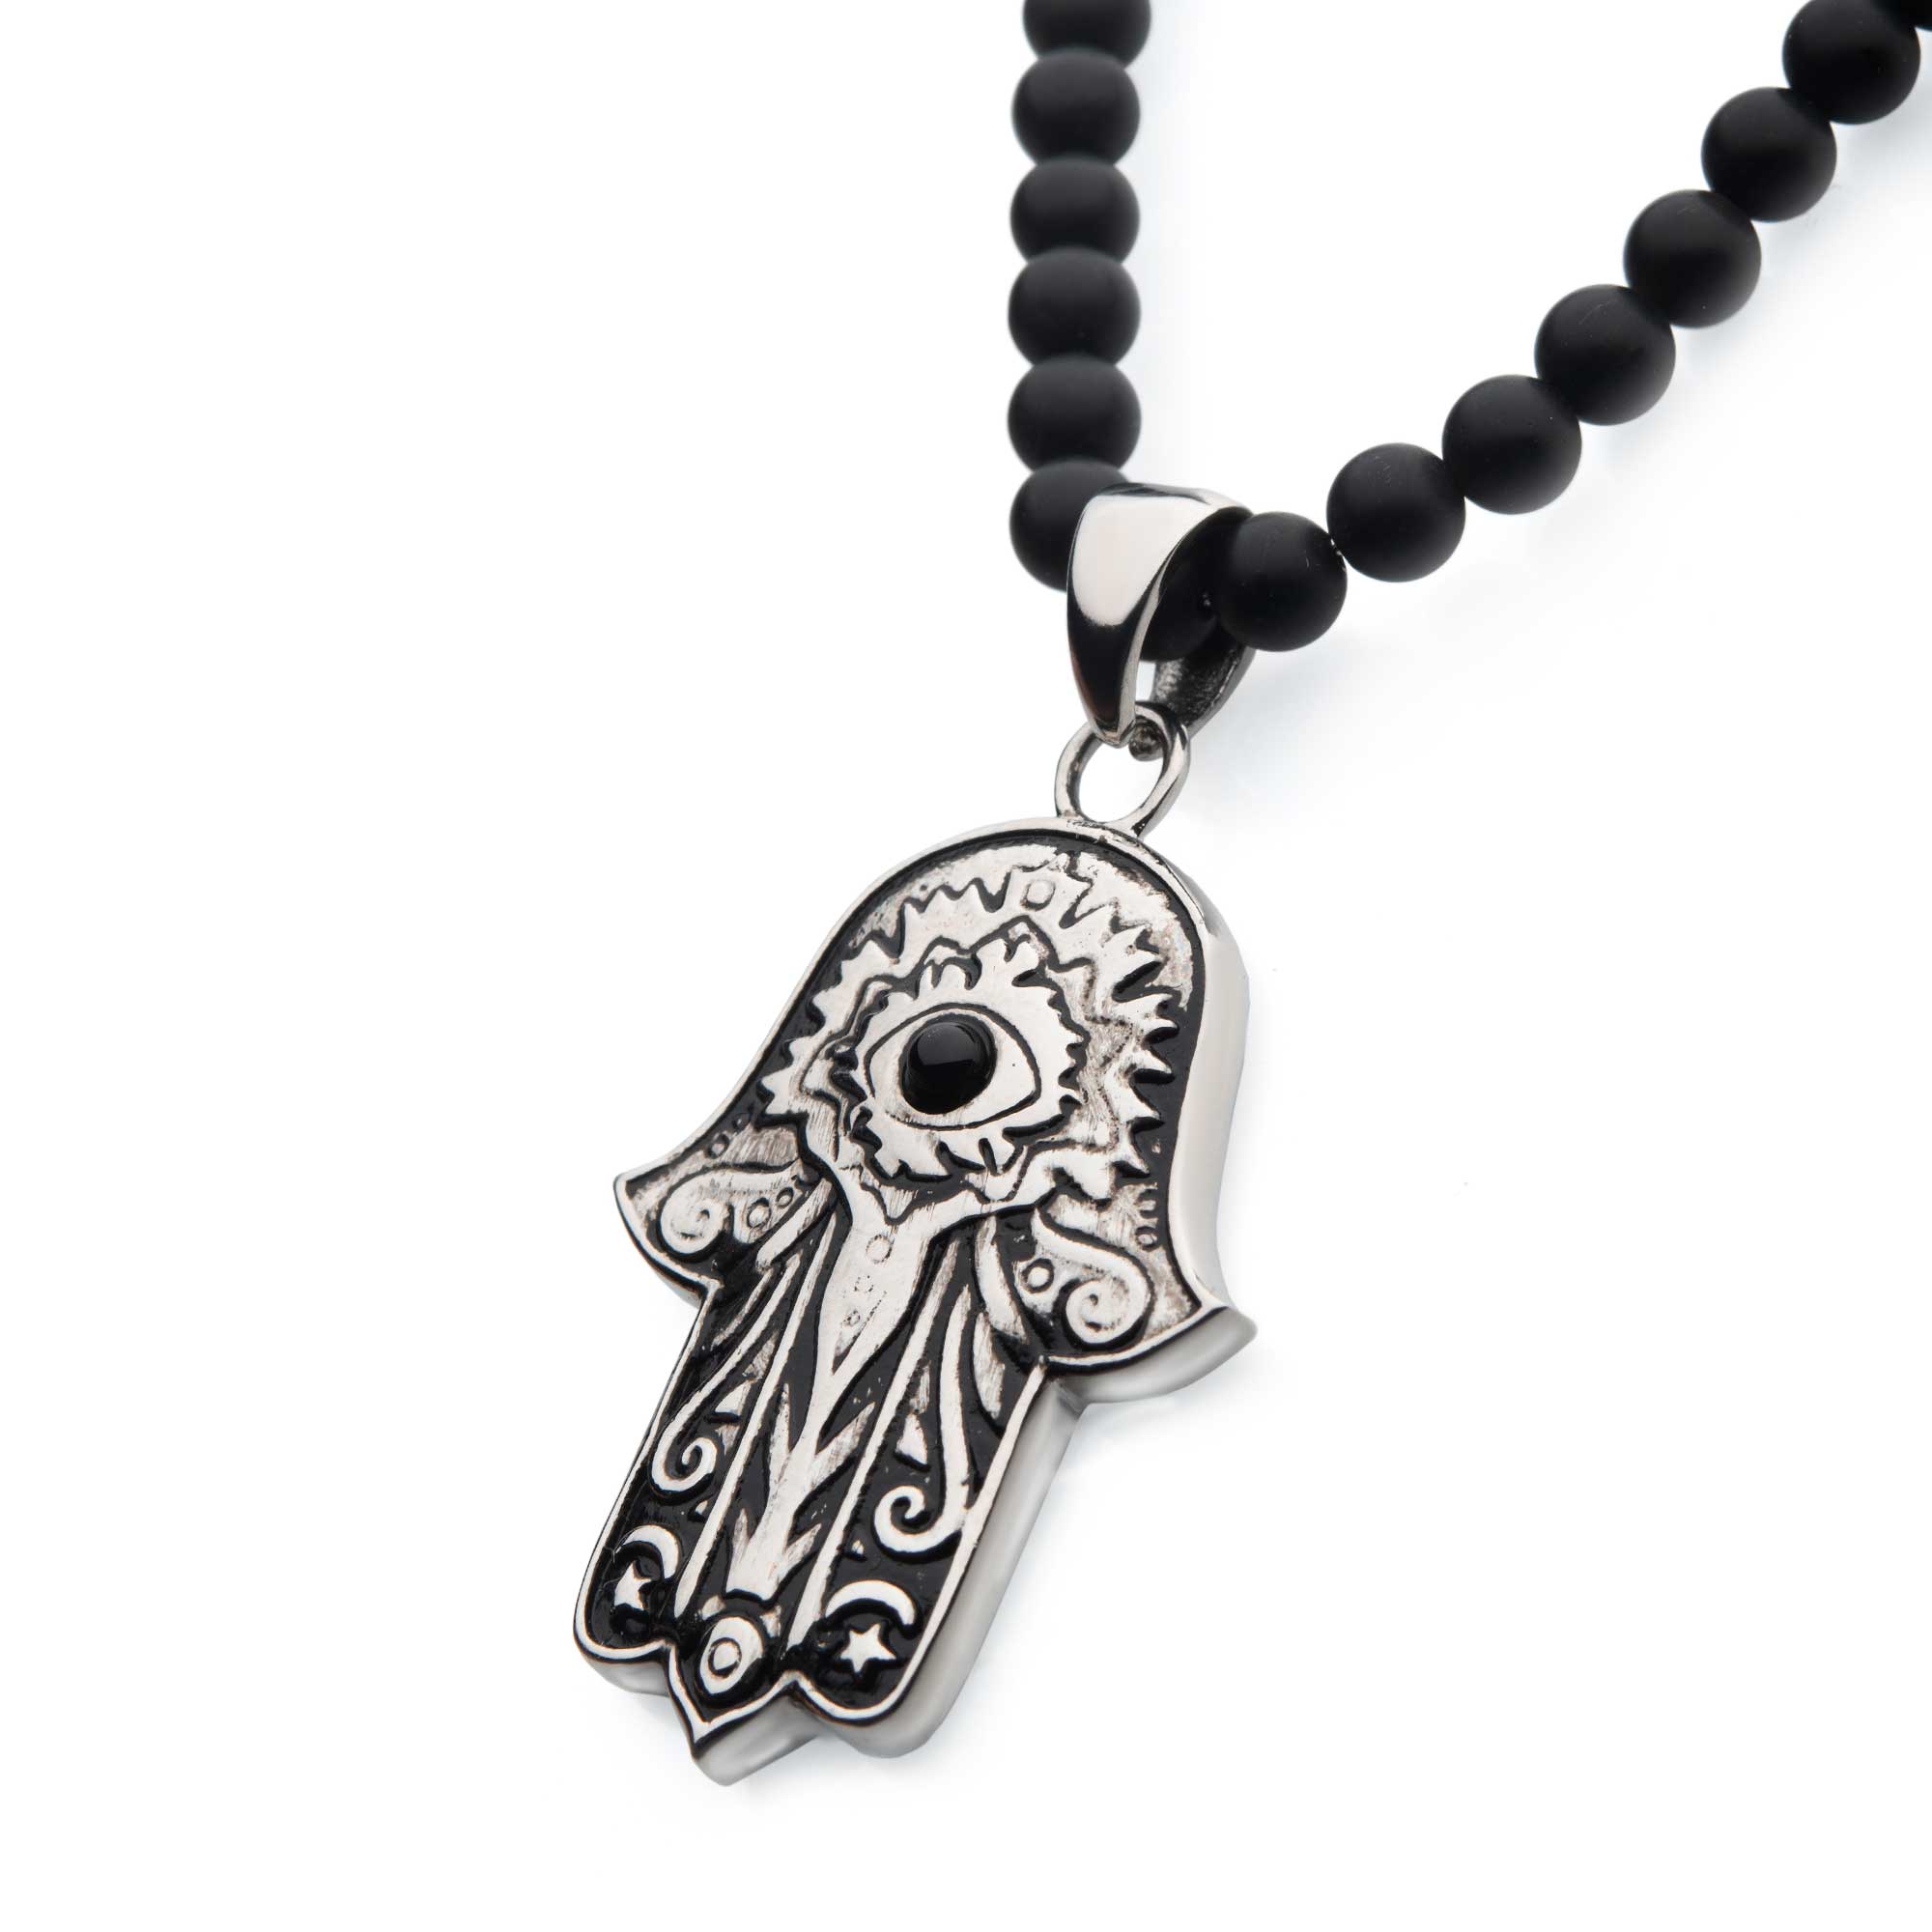 Stainless Steel with Centerpiece Black Agate Stone Hamsa Pendant, with Black Agate Stone Bead Necklace Image 2 Morin Jewelers Southbridge, MA